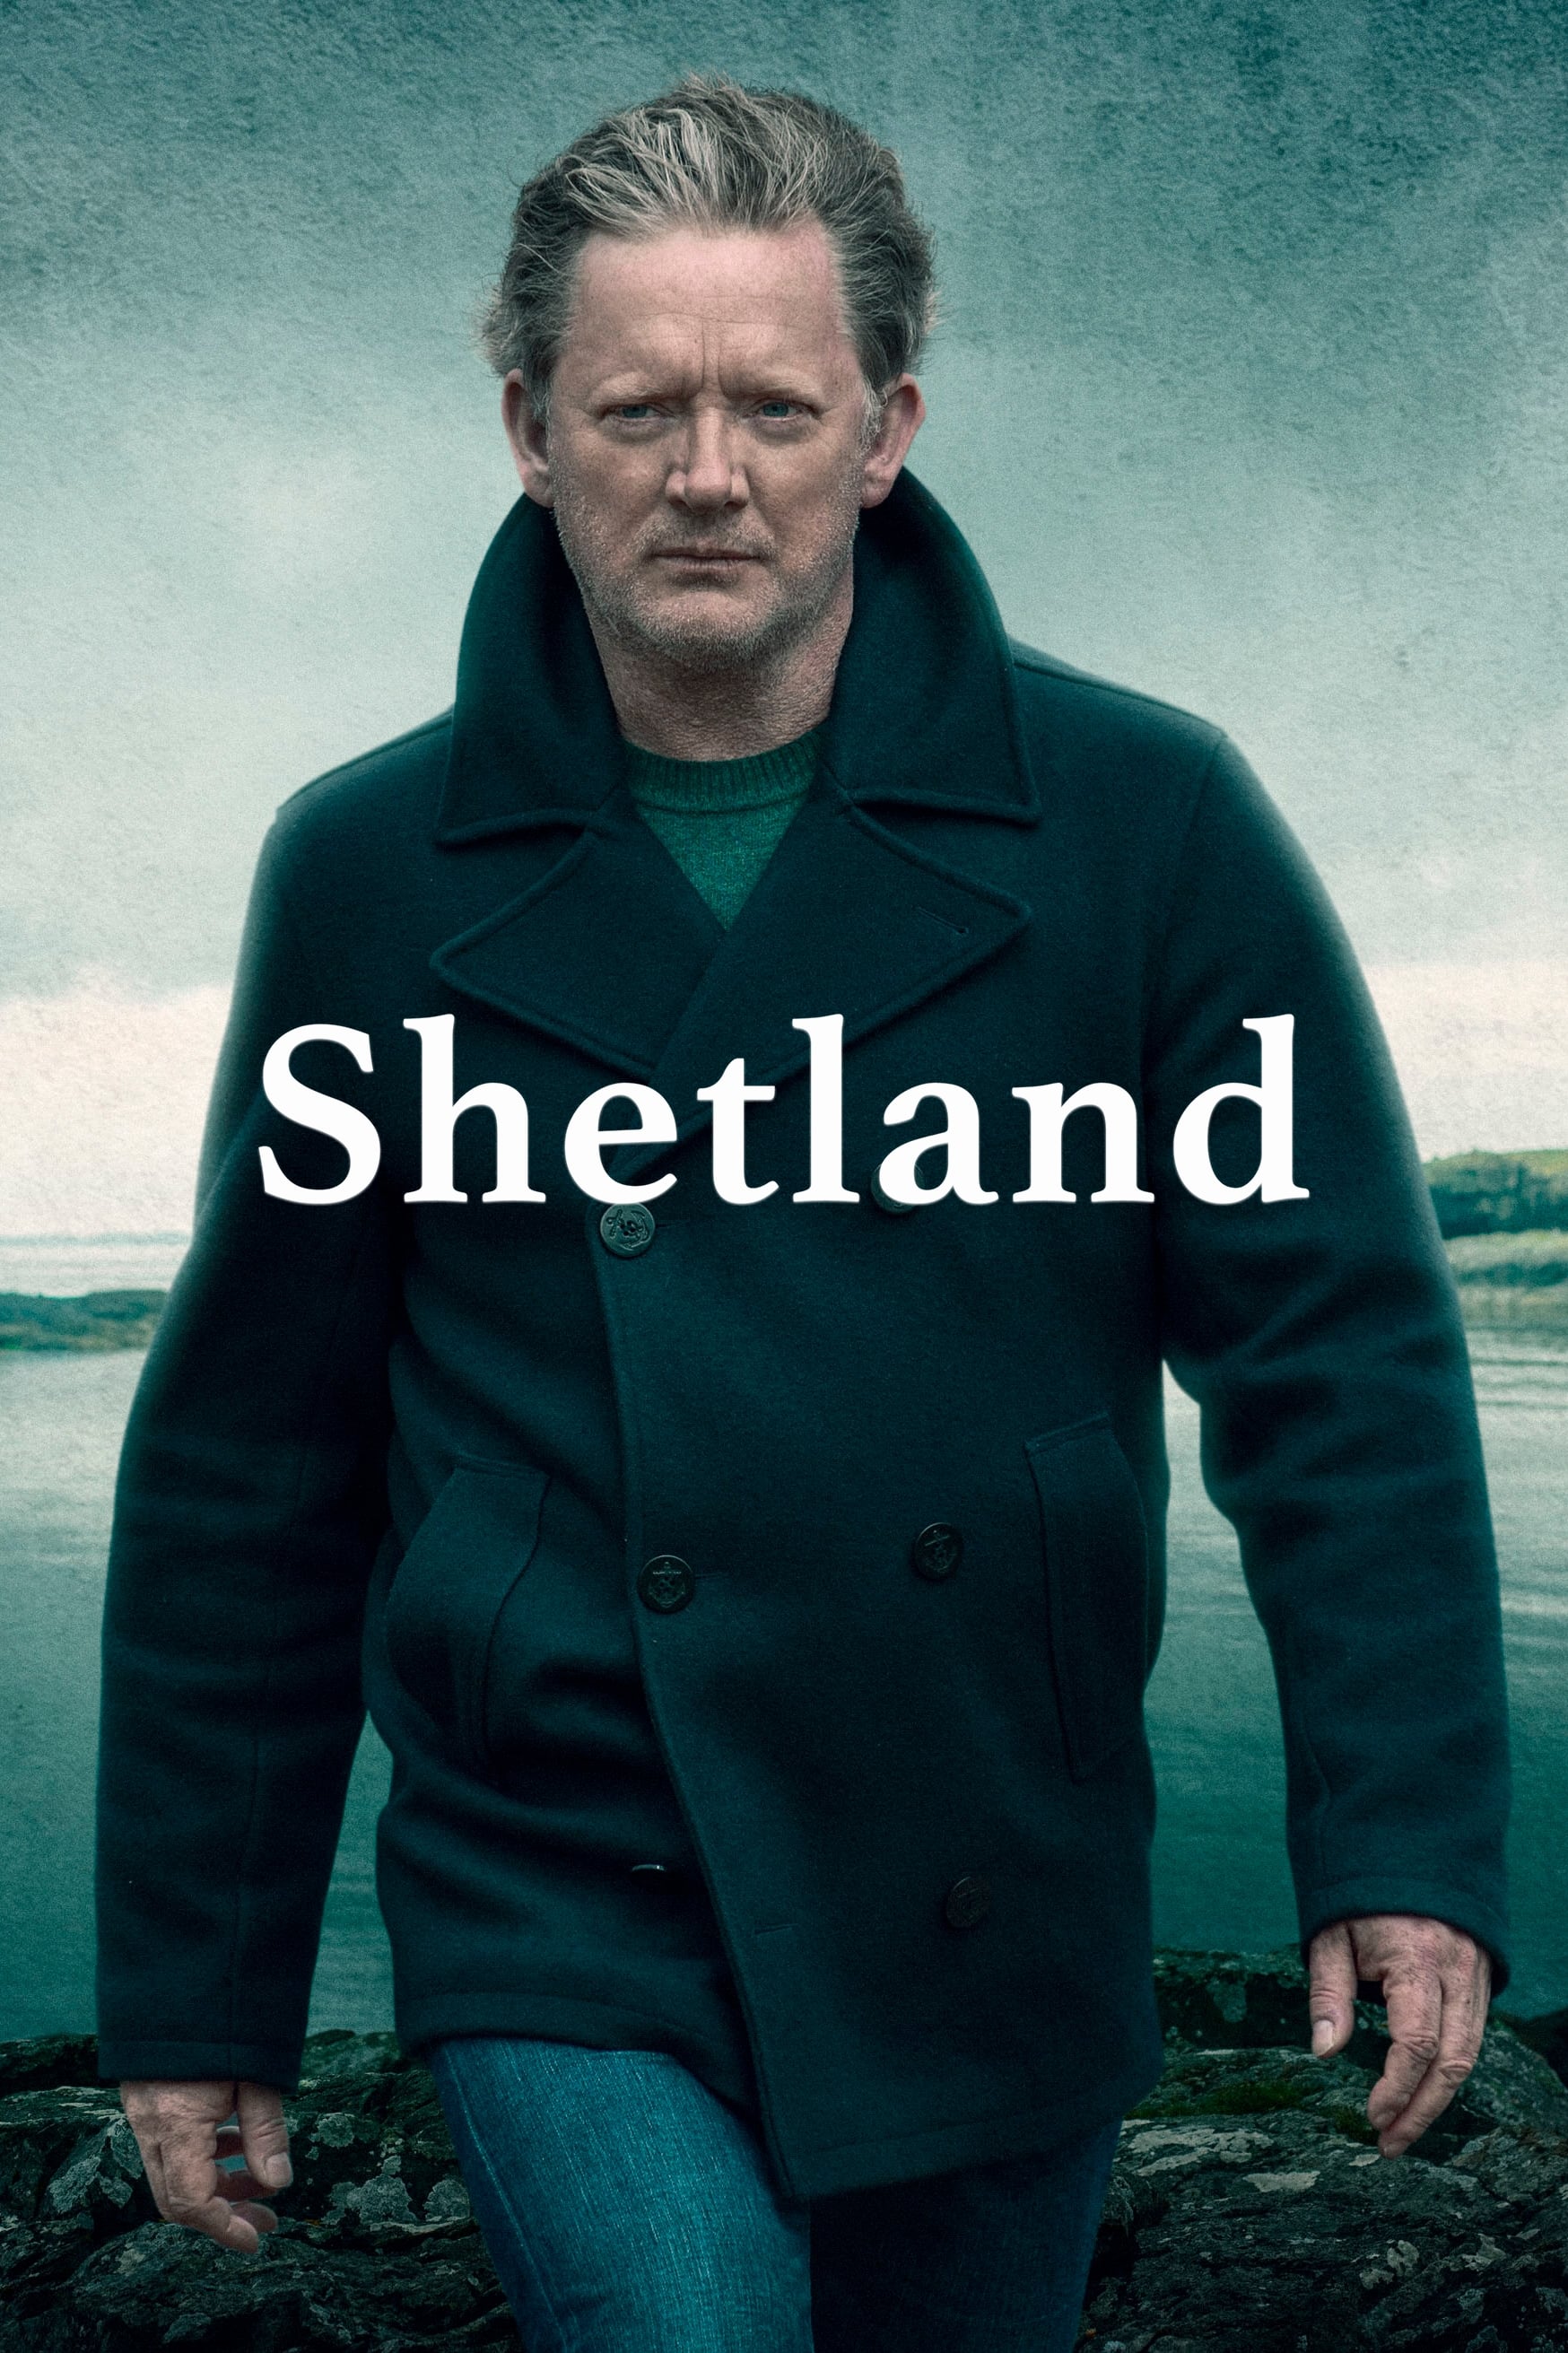 Shetland TV Shows About Small Community